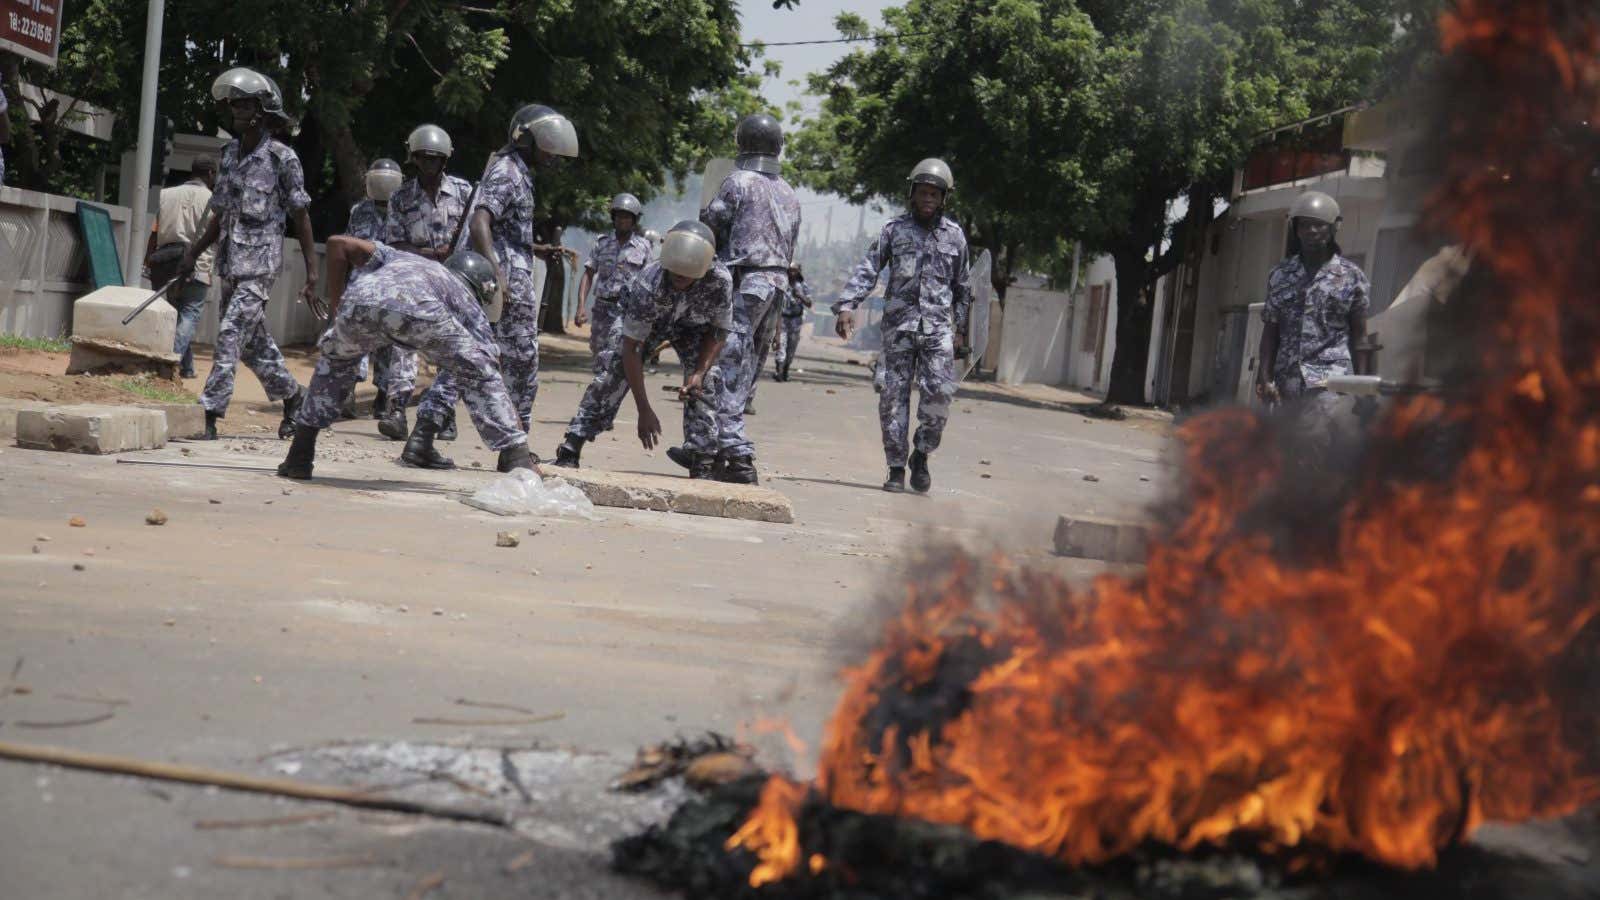 Police firing teargas to disperse protesters during Togo election in 2013.